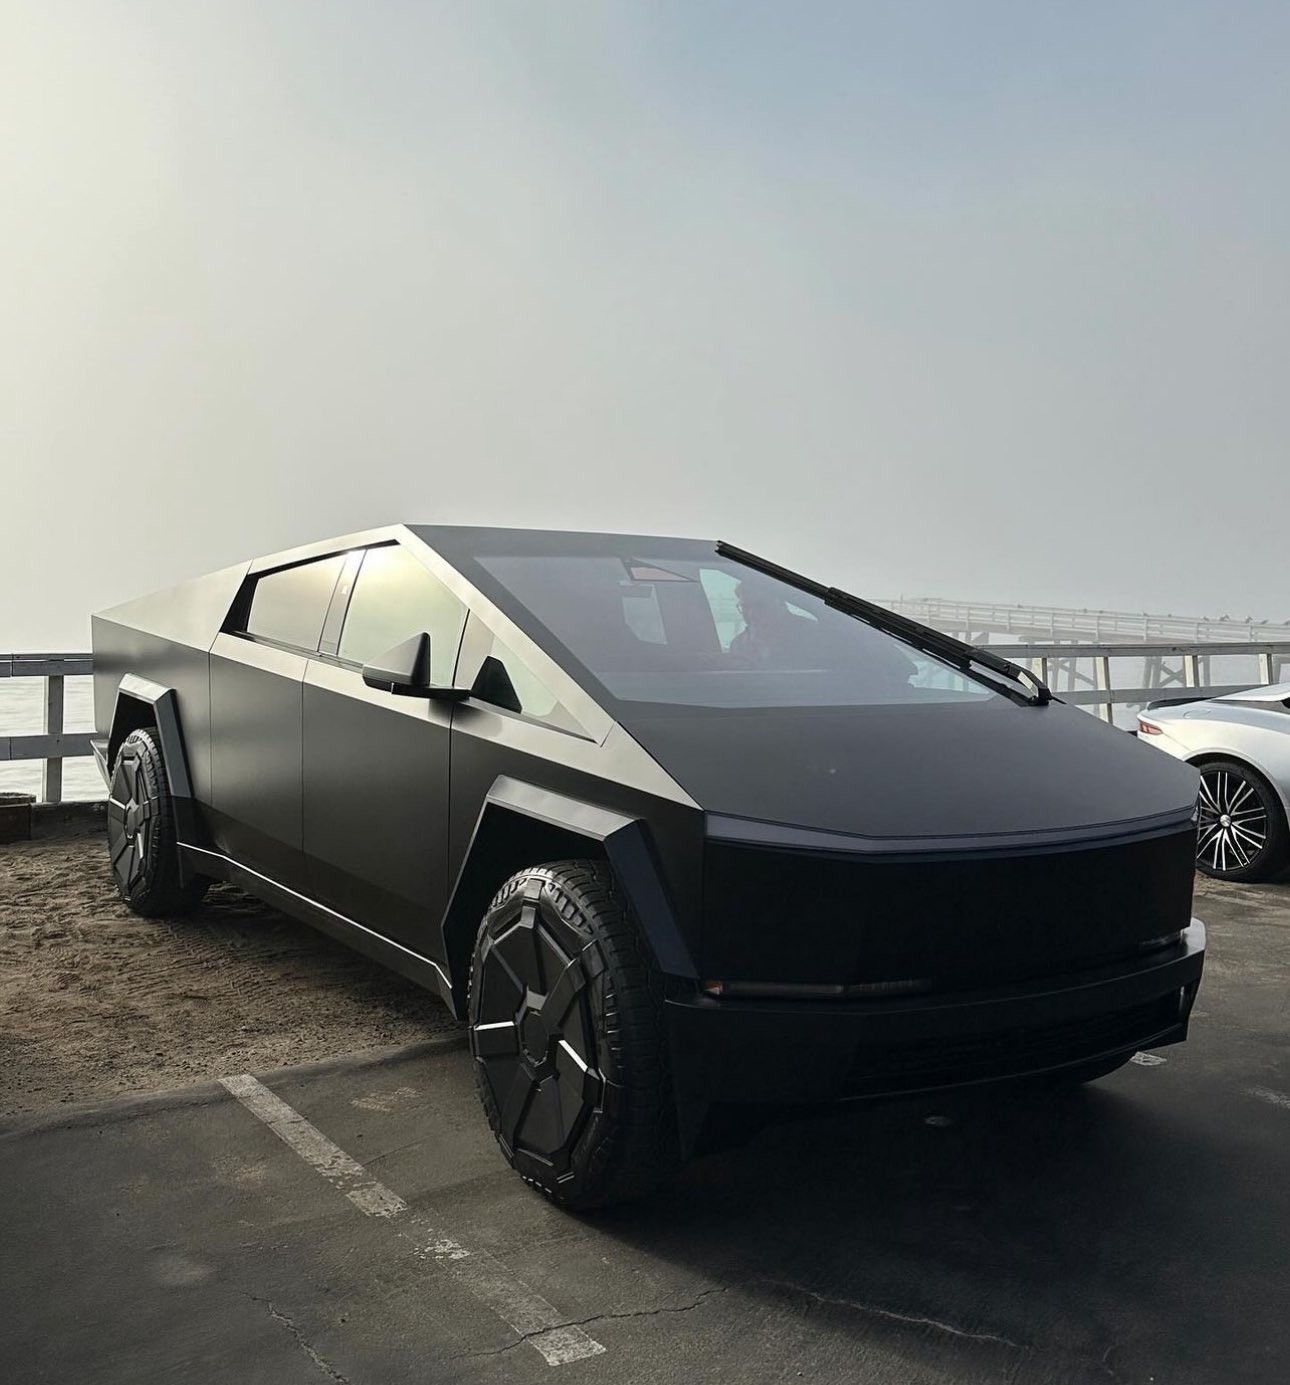 Tesla Cybertruck Specs and Dimensions Leaked Ahead of Delivery Event